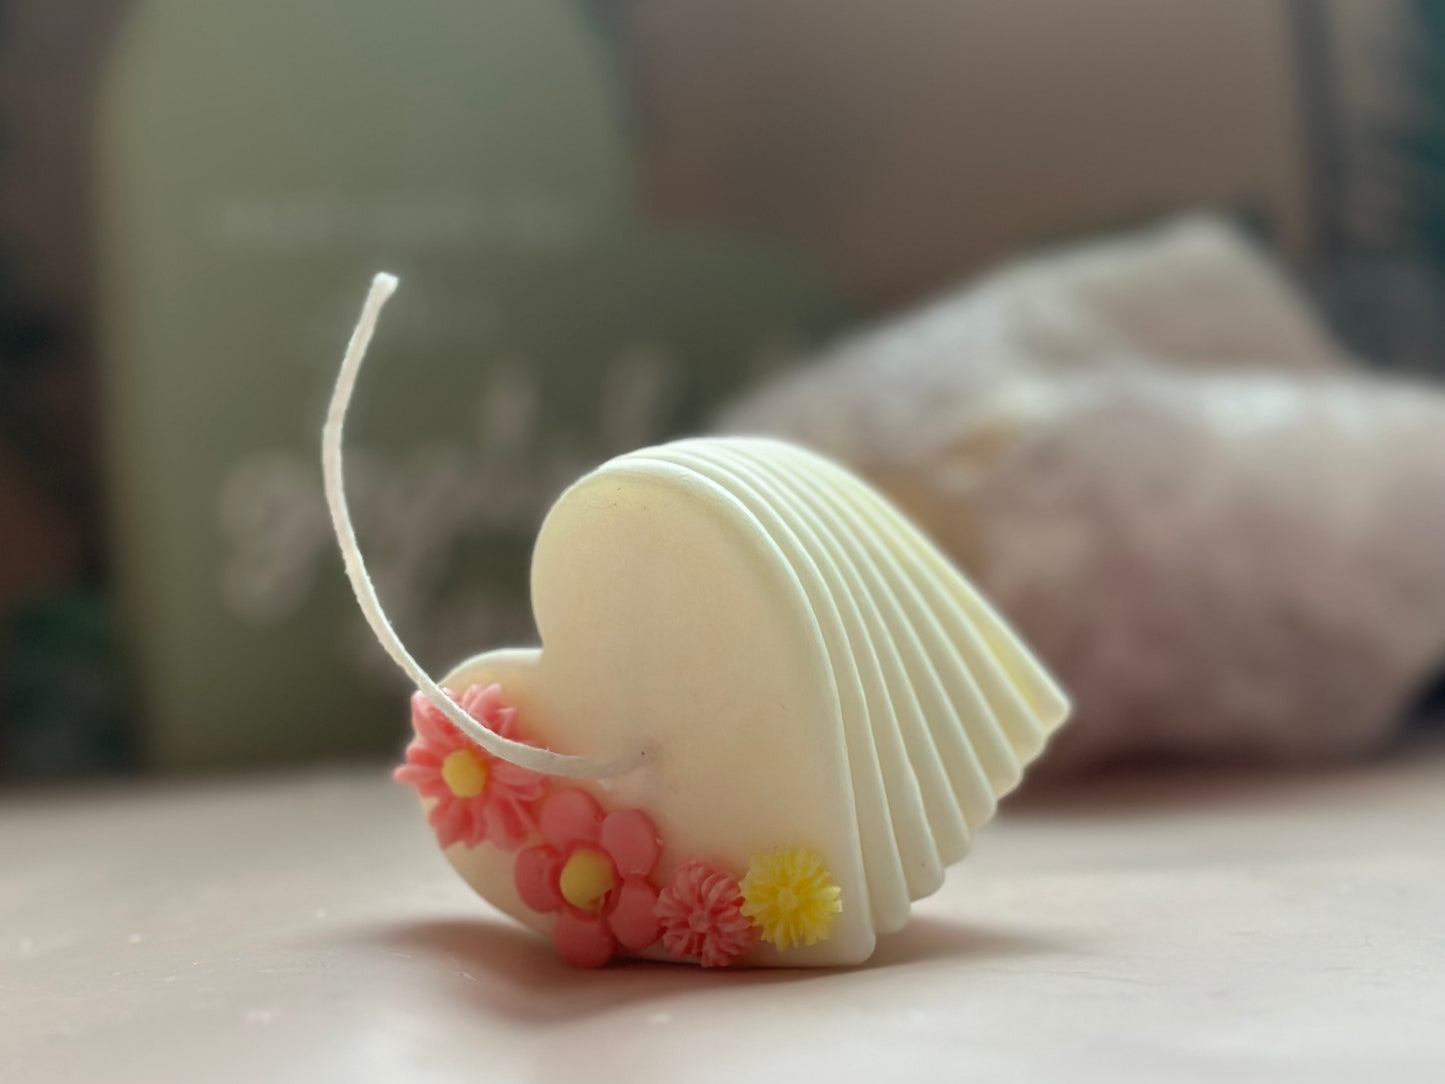 Harmonium Heart Candle, Floral Heart Candle, Home Decor, Love Candle, White Beeswax Candle